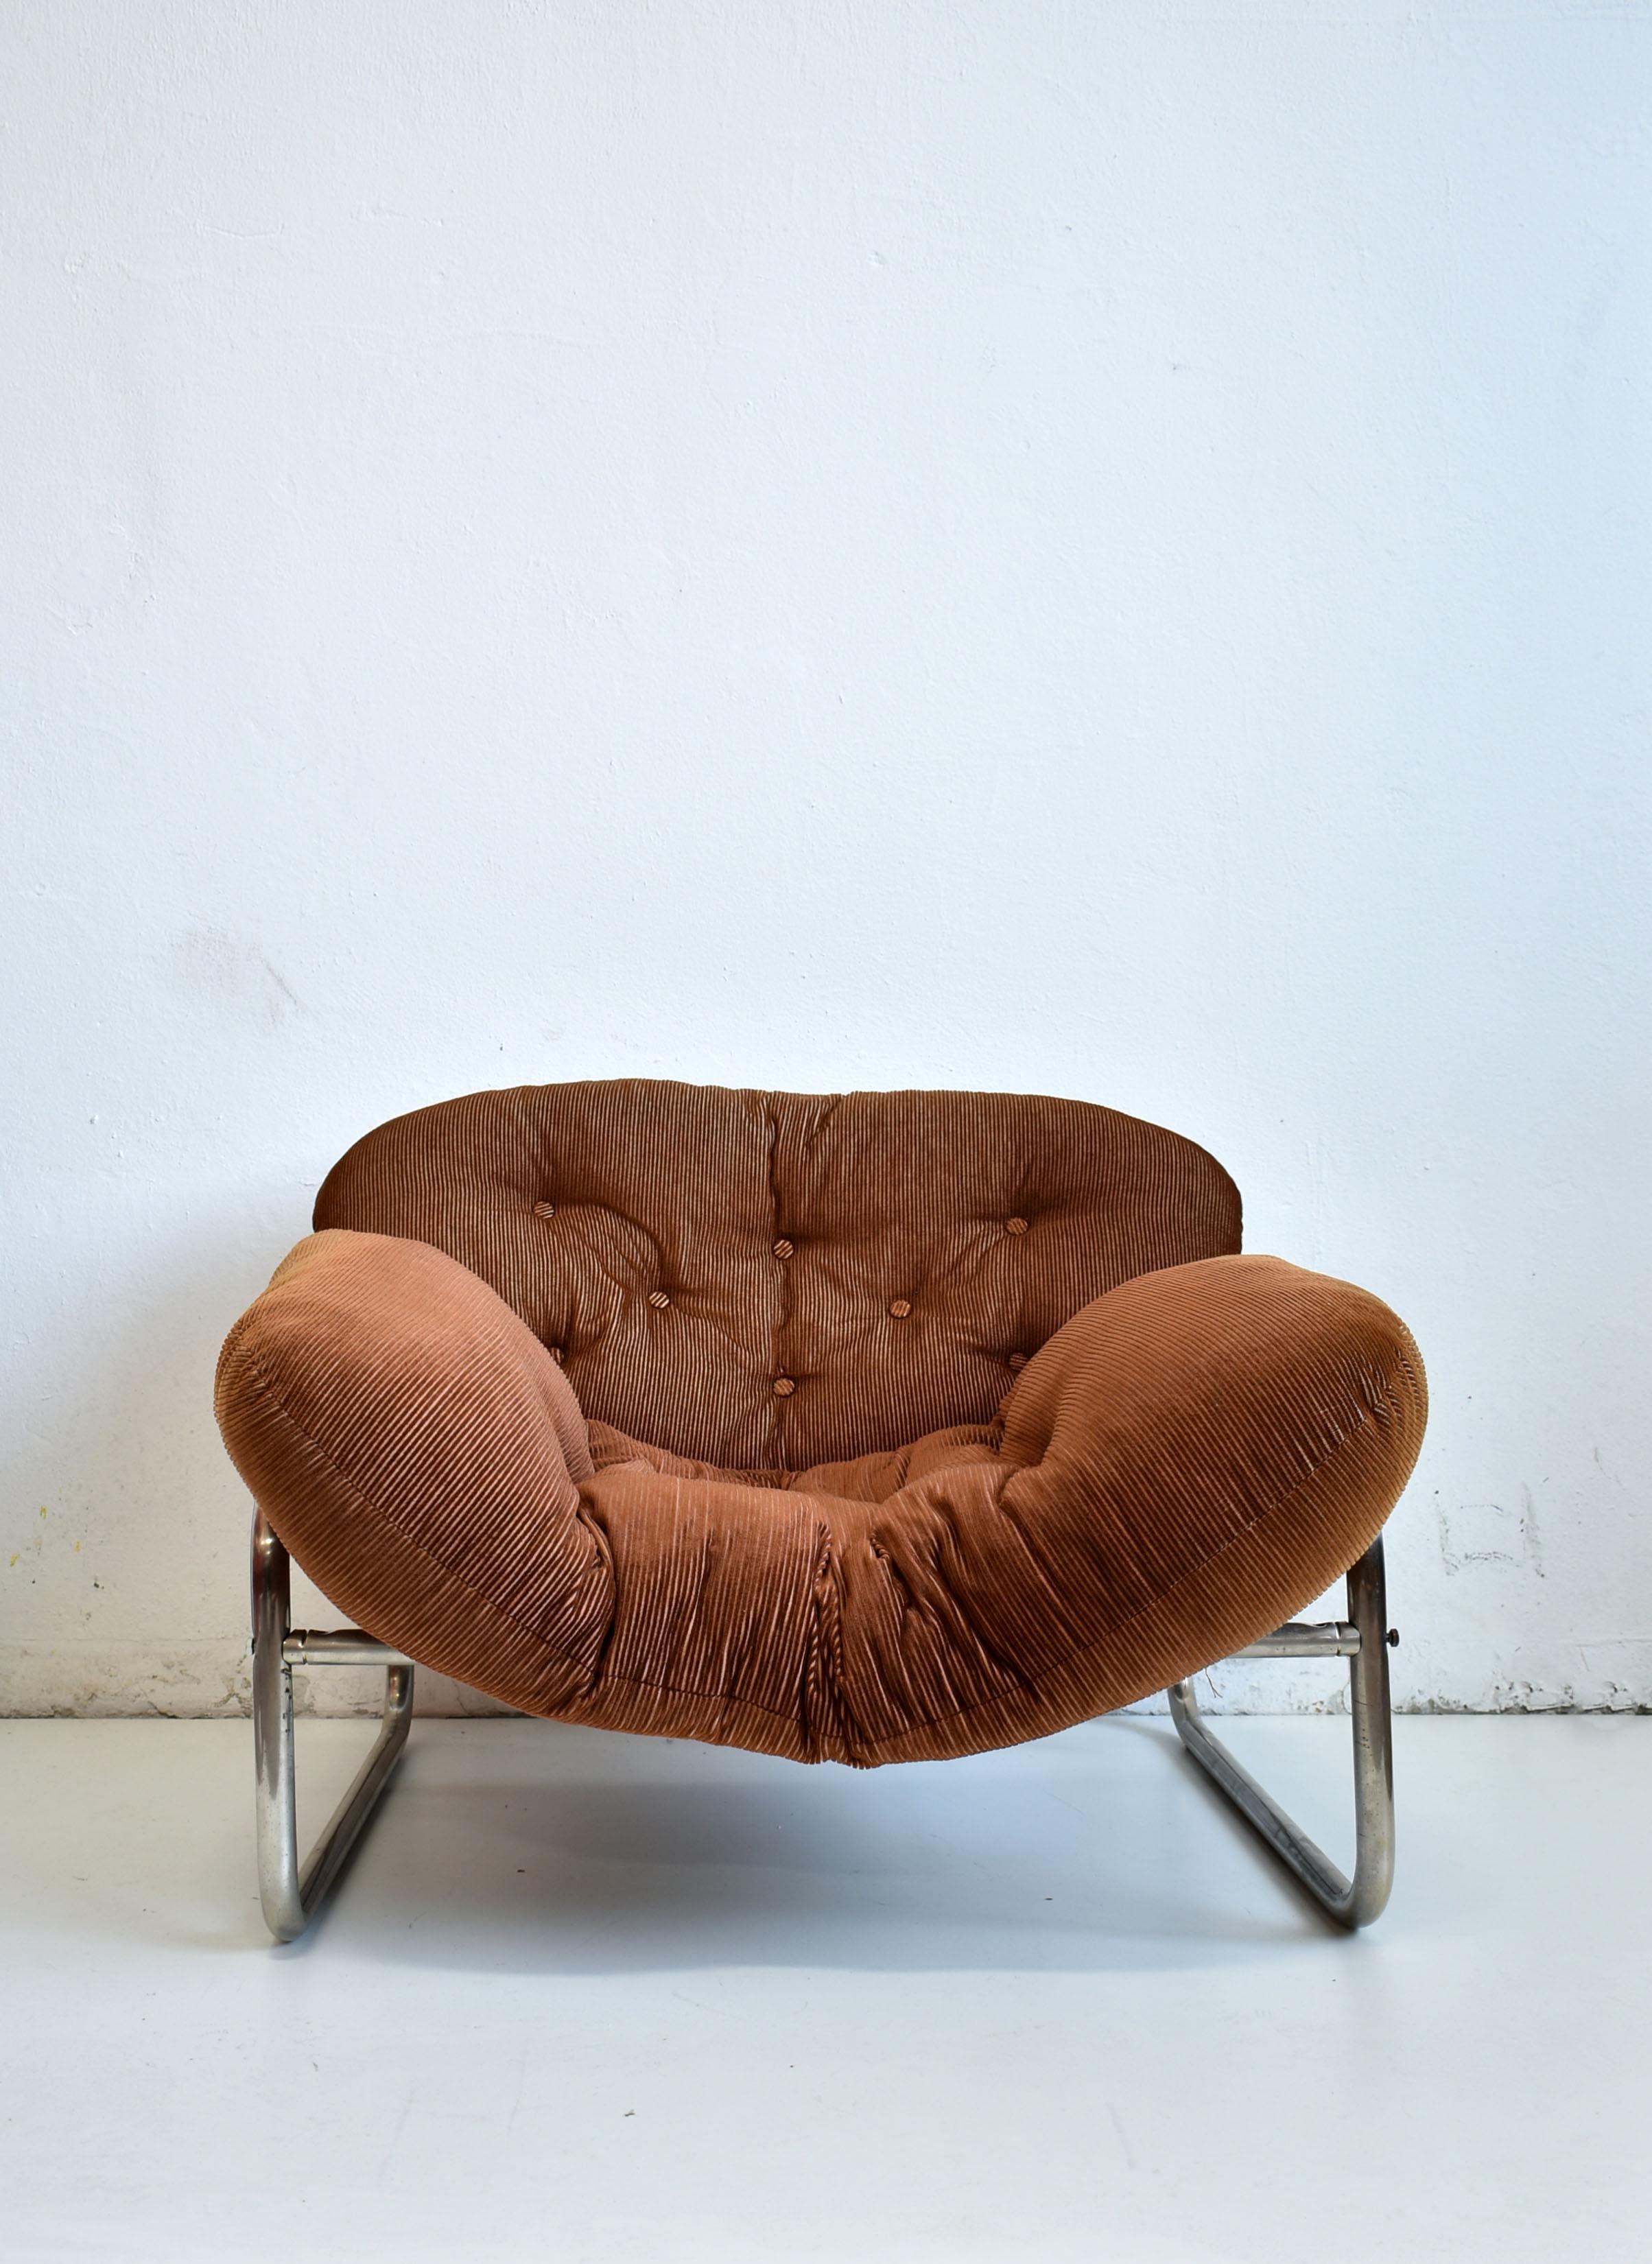 Exceptionally comfortable lounge chair manufactured in the 1970s by Swed Form

Design attributed to Johan Bertil Häggström

The chair features a Bauhaus style tubular chrome frame with a seat made of brown canvas. The chair has an original